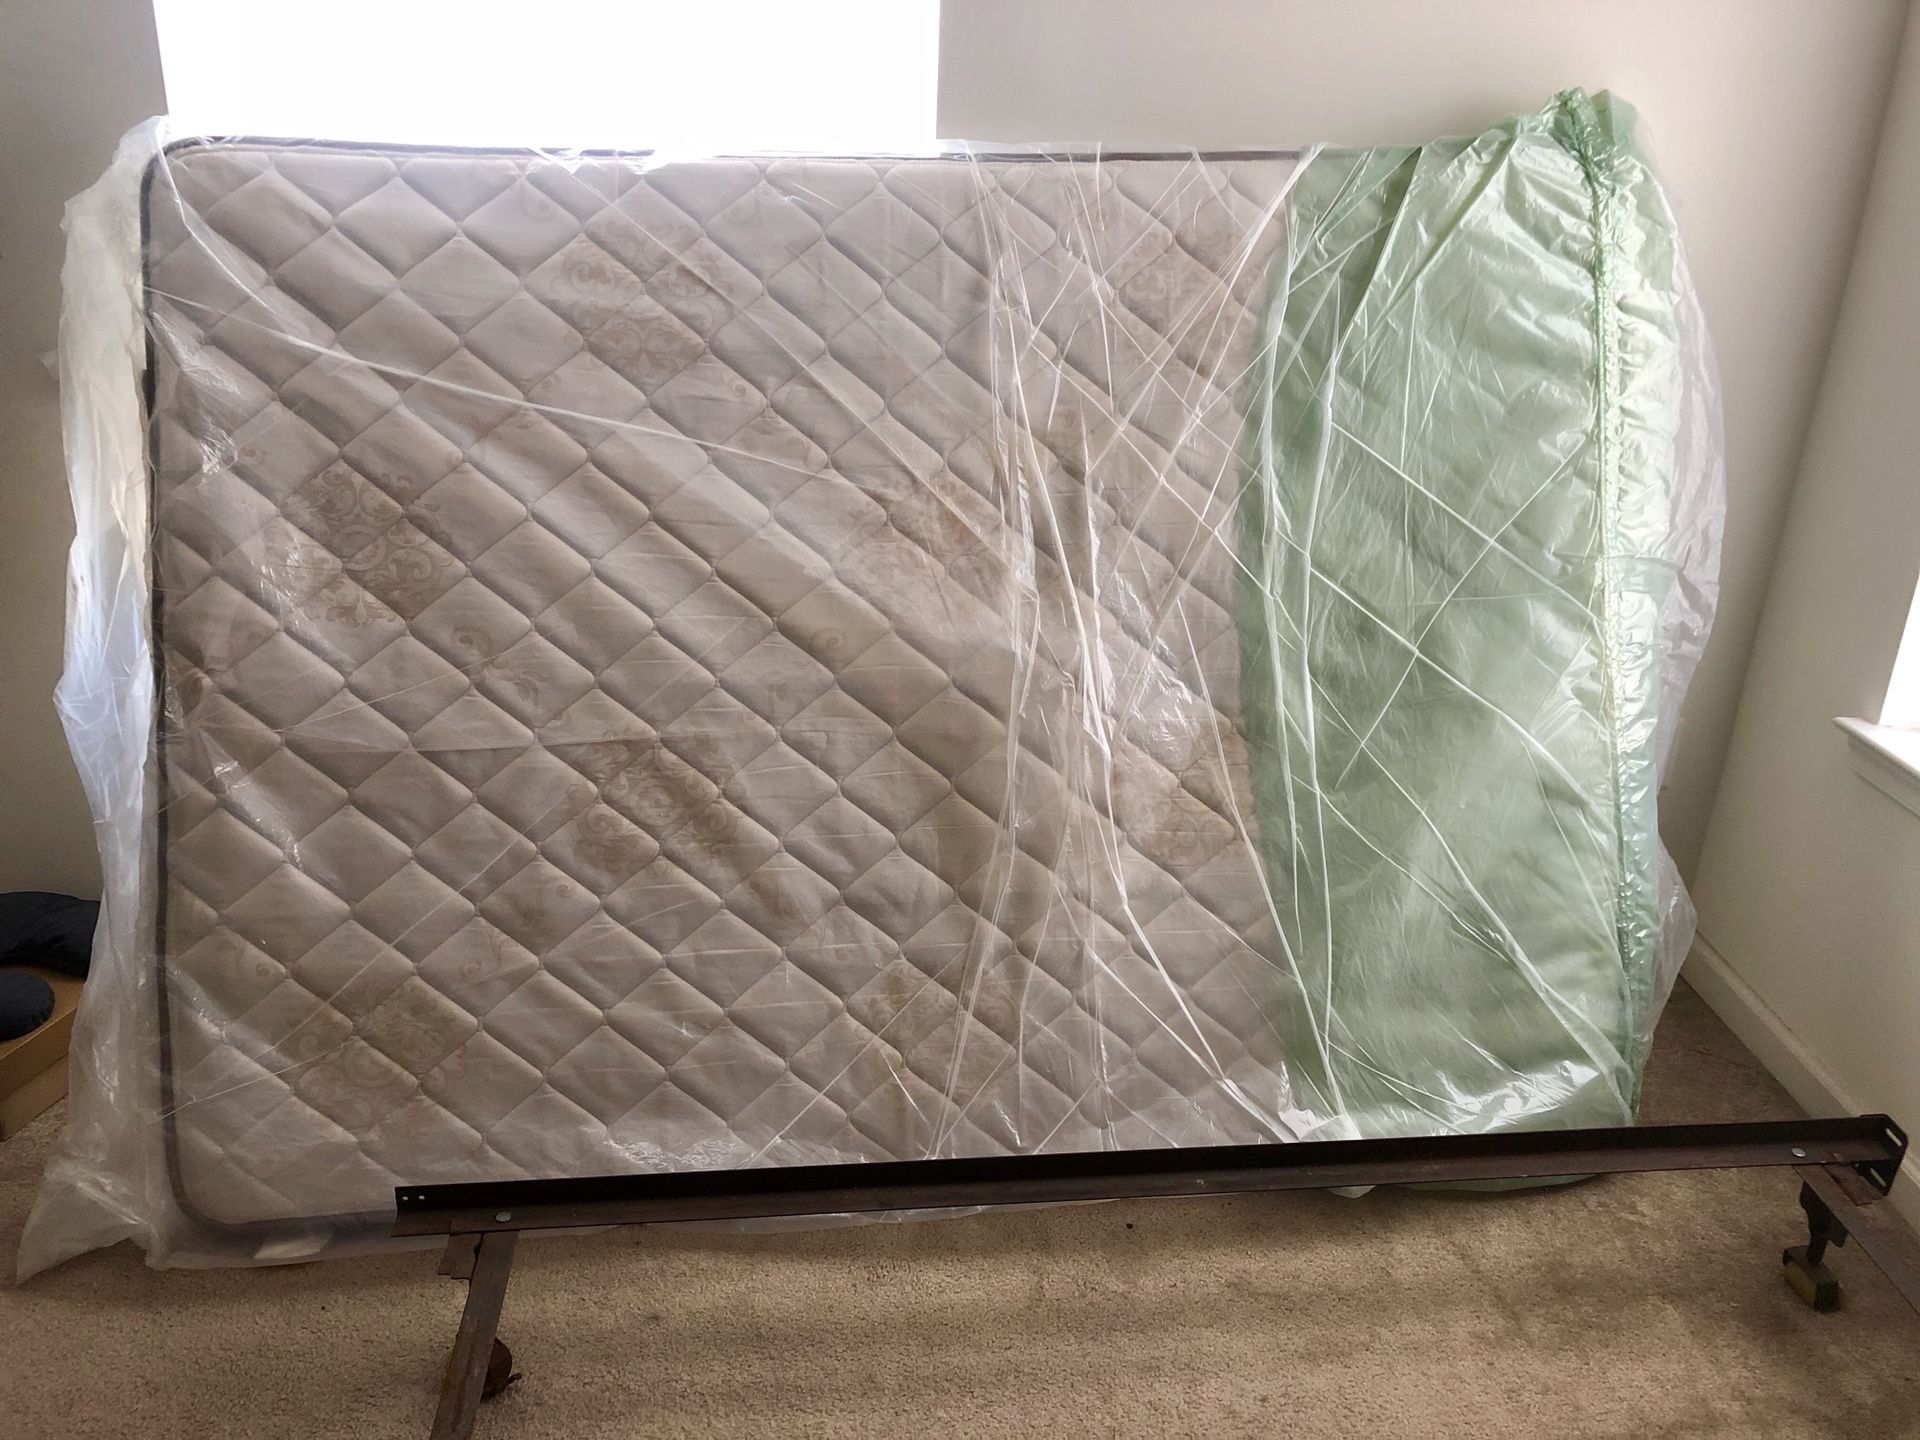 Full size mattress and box springs